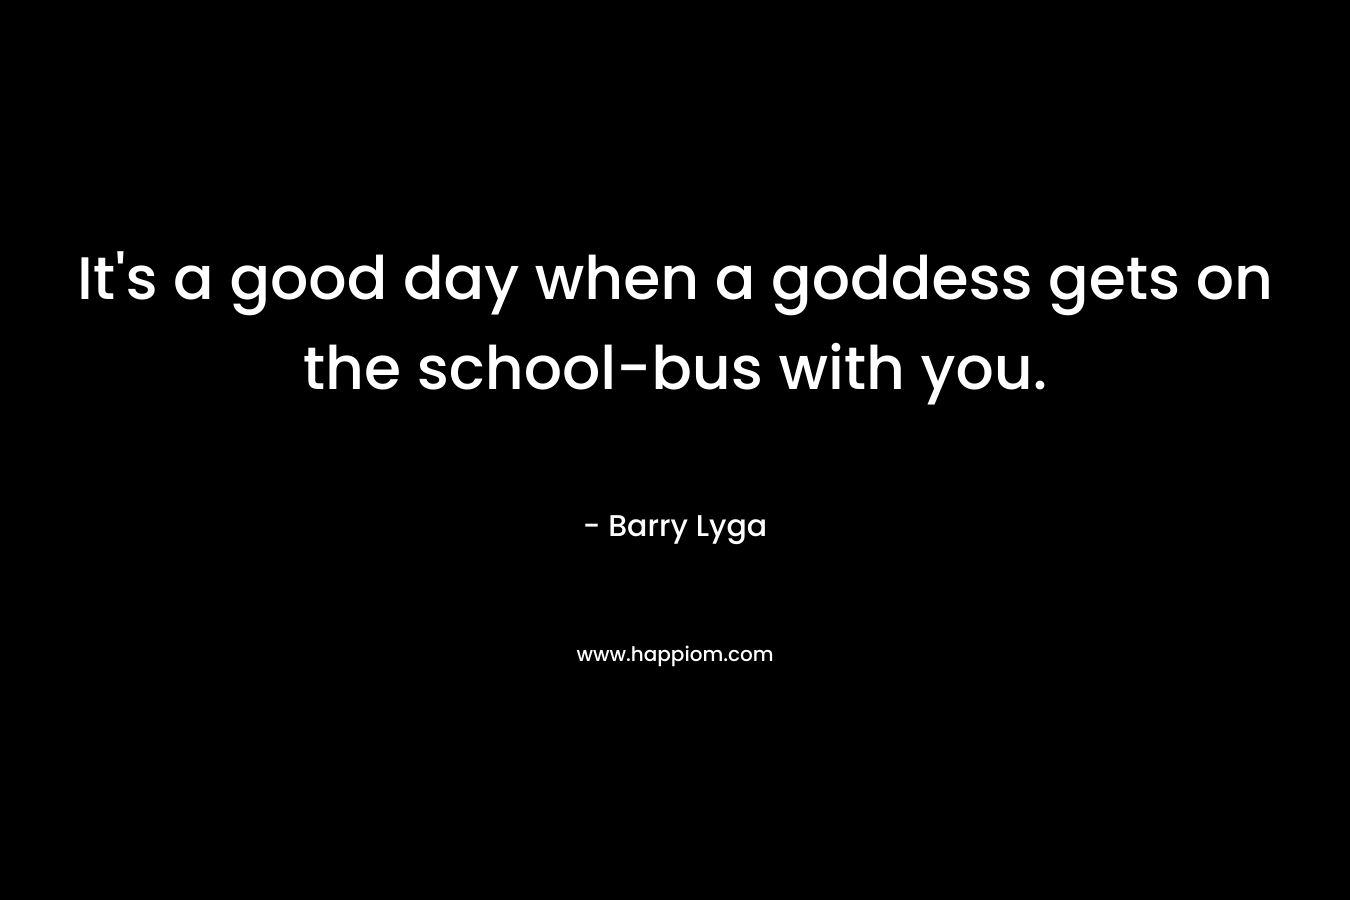 It's a good day when a goddess gets on the school-bus with you.